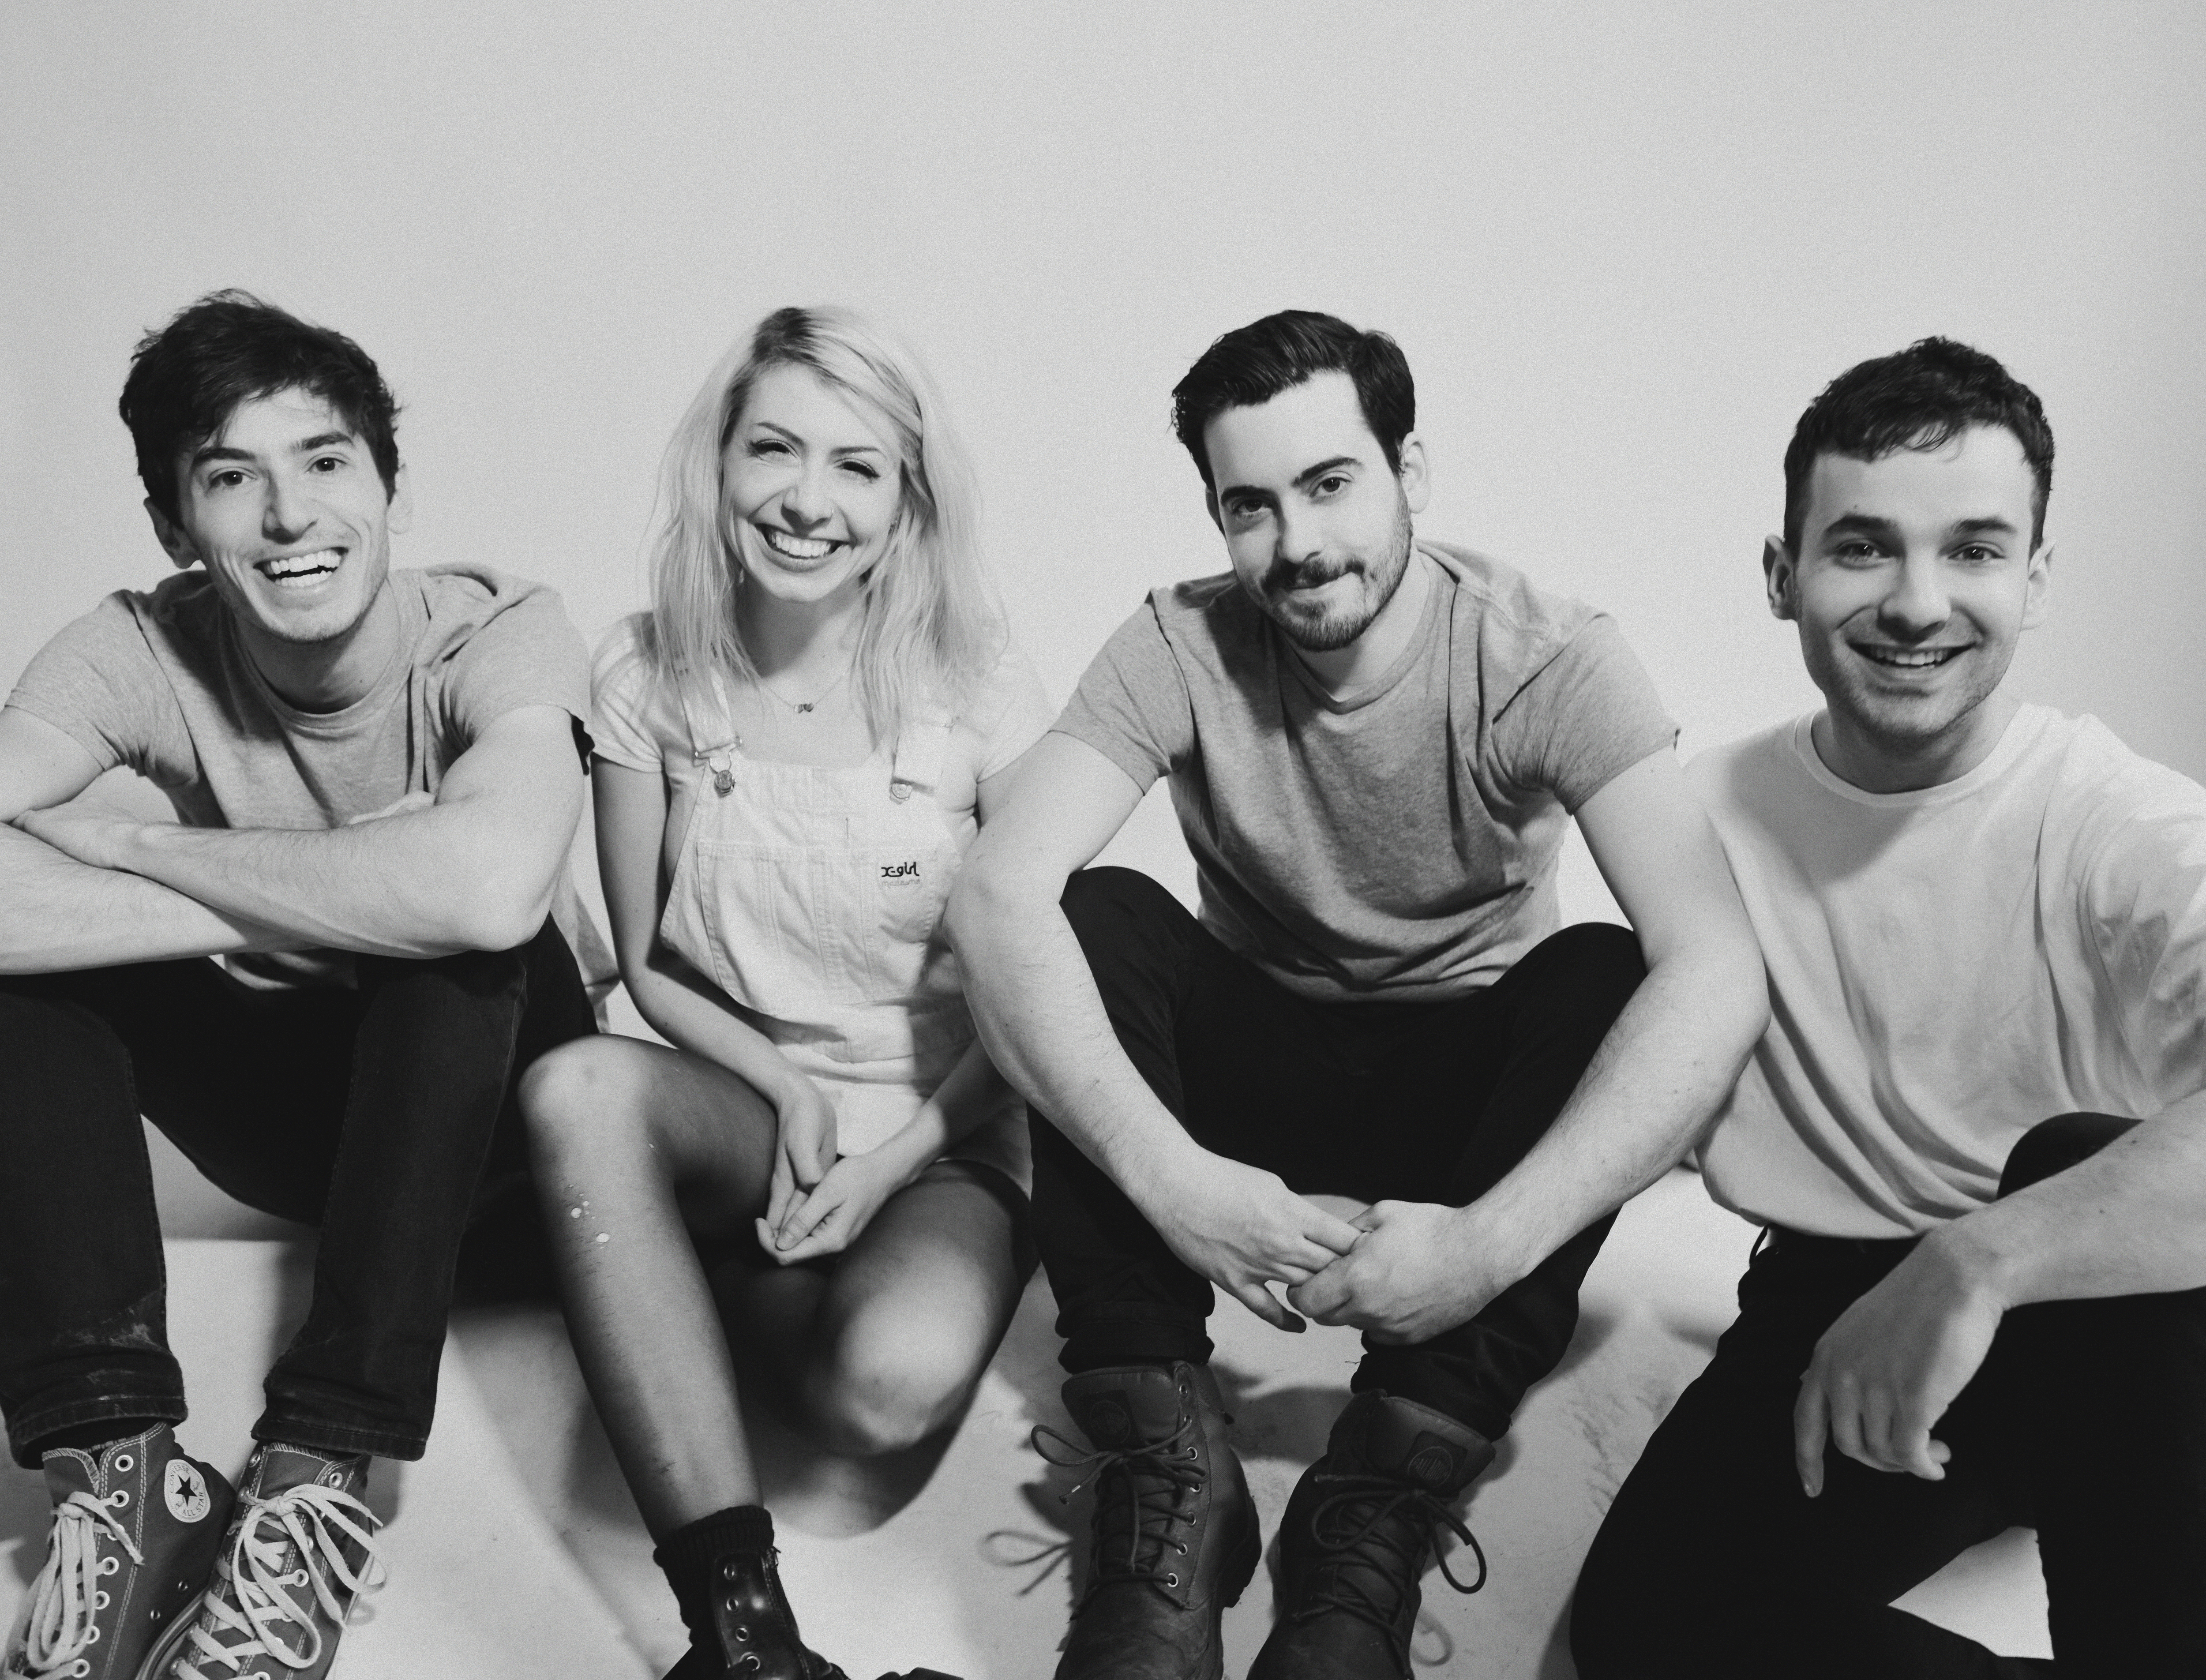 Our interview with Charly Bliss: Eva Hendricks of Charly Bliss talks musical theatre